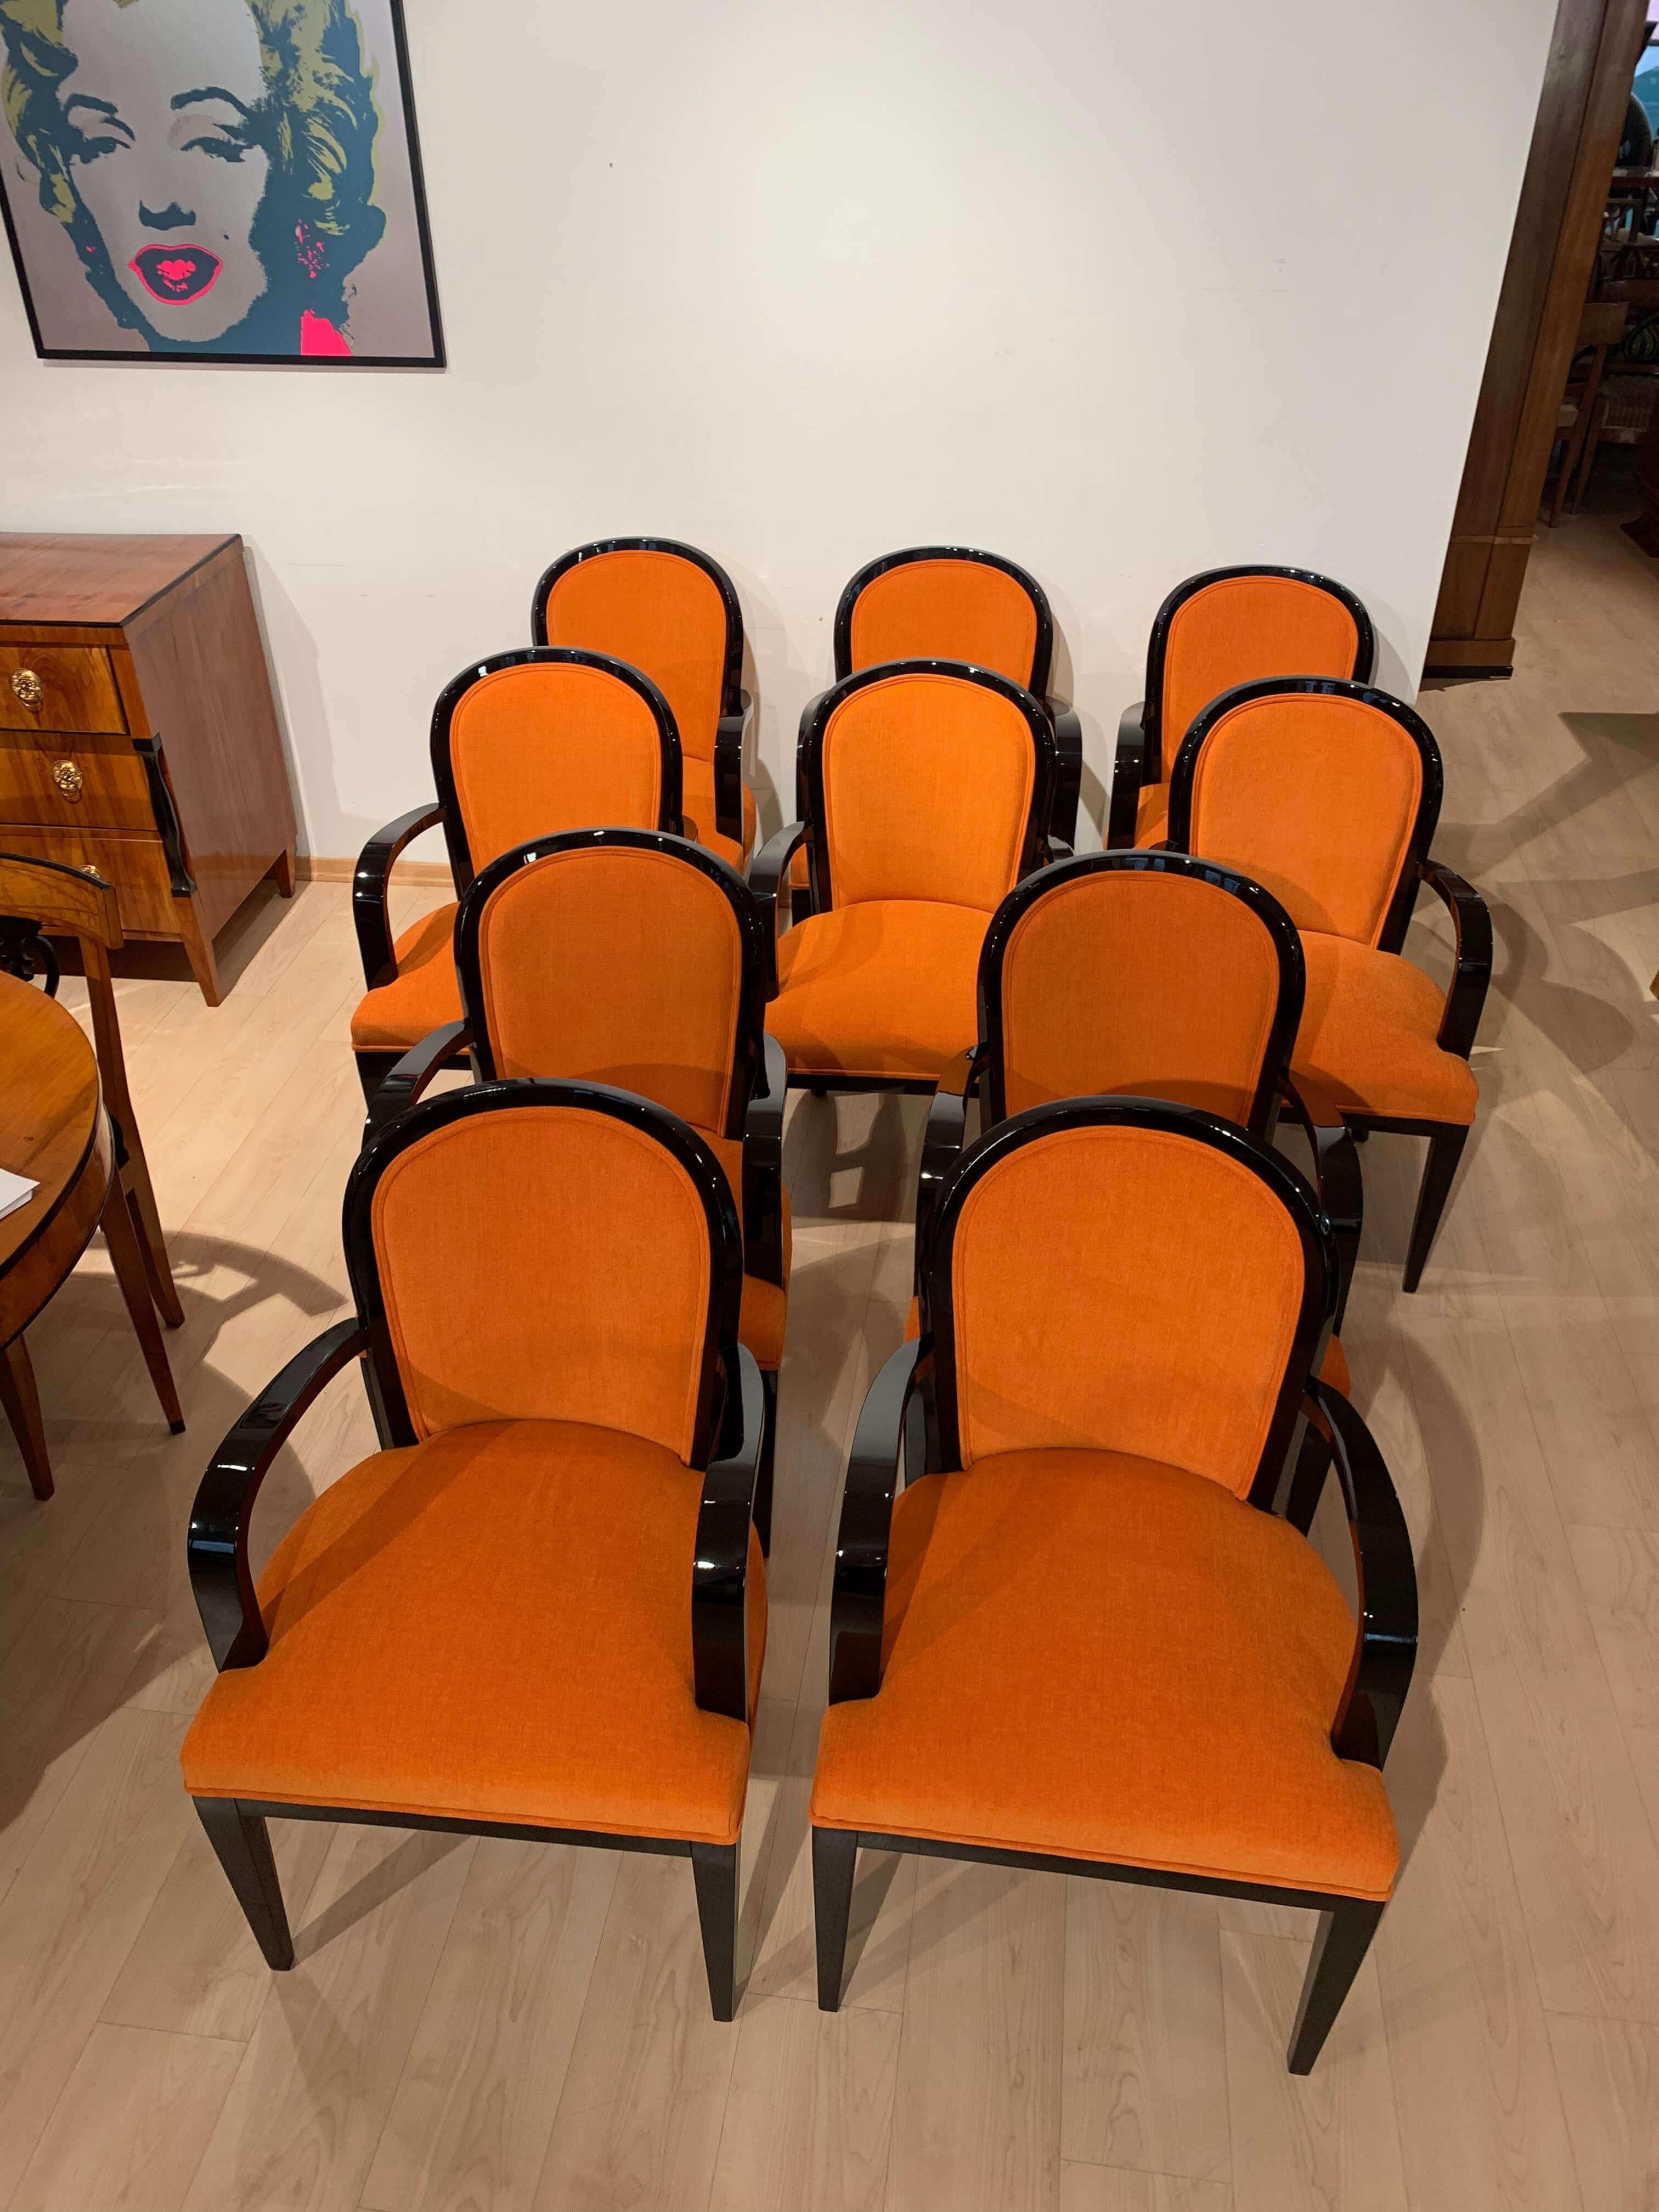 Exquisite set of ten original Art Deco Dining Chairs from France, circa 1930. These elegant armchairs feature a classic Art Deco design with a curved backrest and open armrests, crafted from solid beech wood and finished with a black piano lacquer